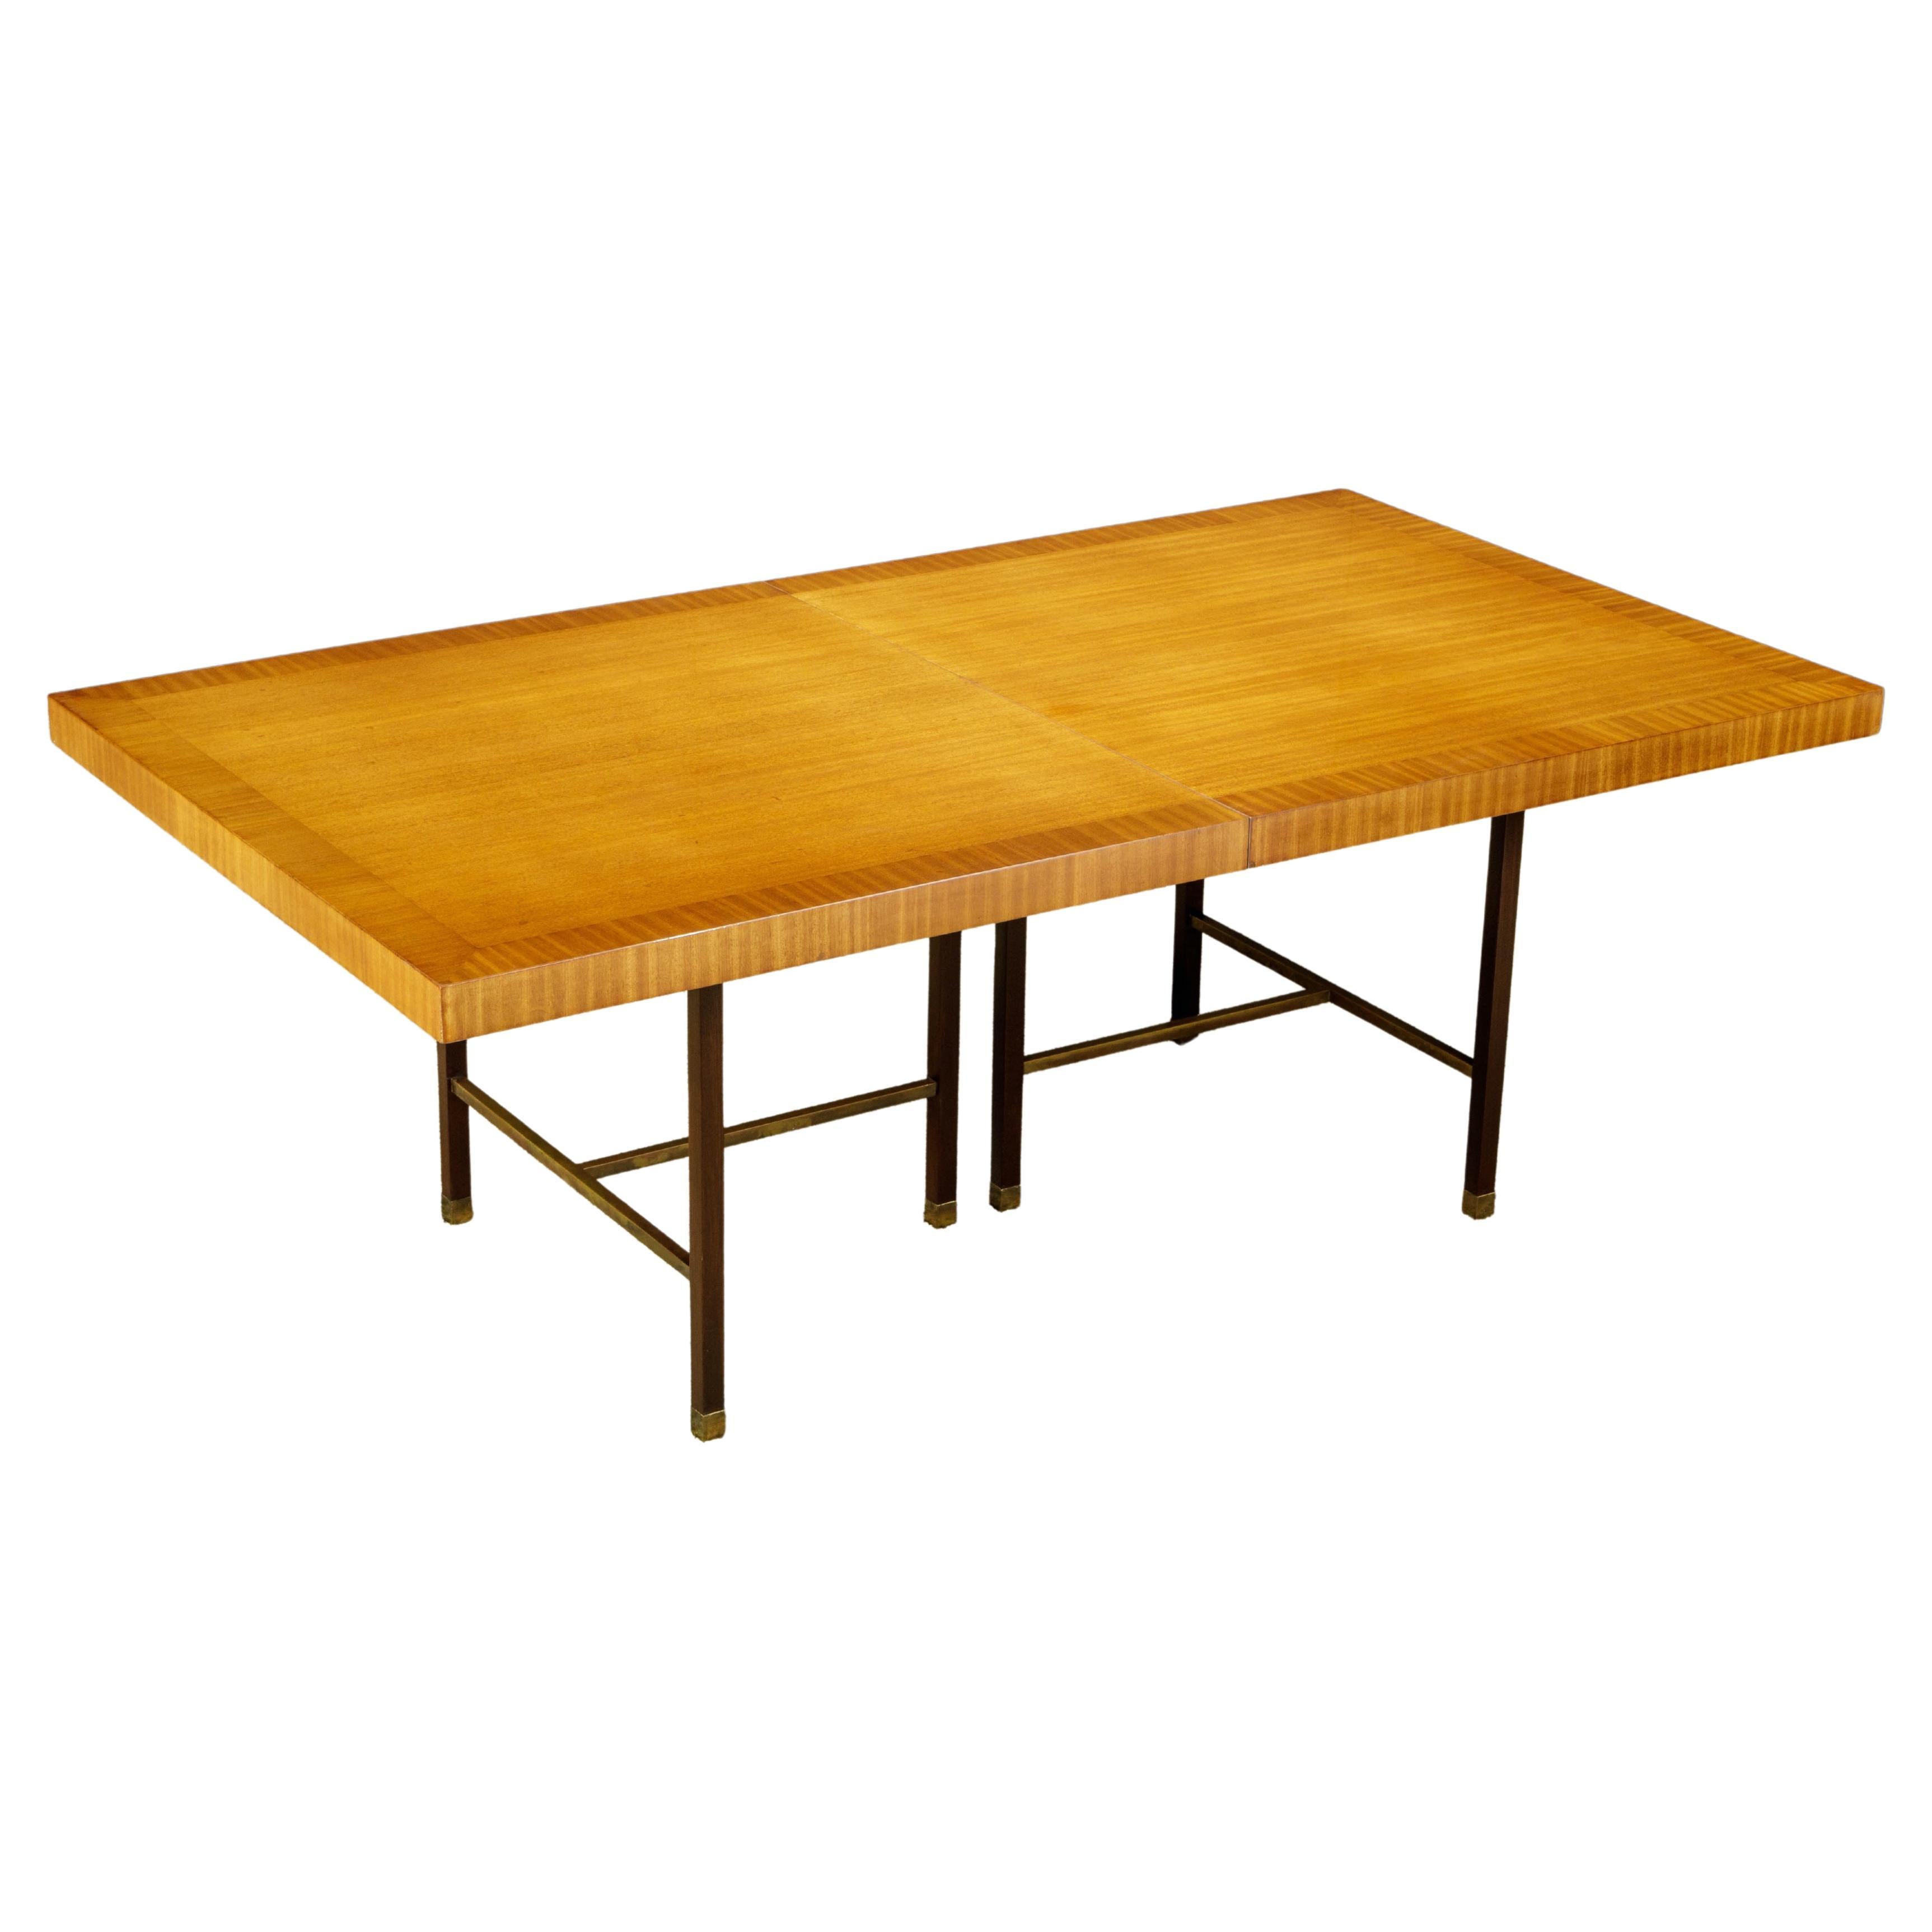 Harvey Probber 12-Person Extendable Dining Table in Mahogany and Brass, 1950s For Sale